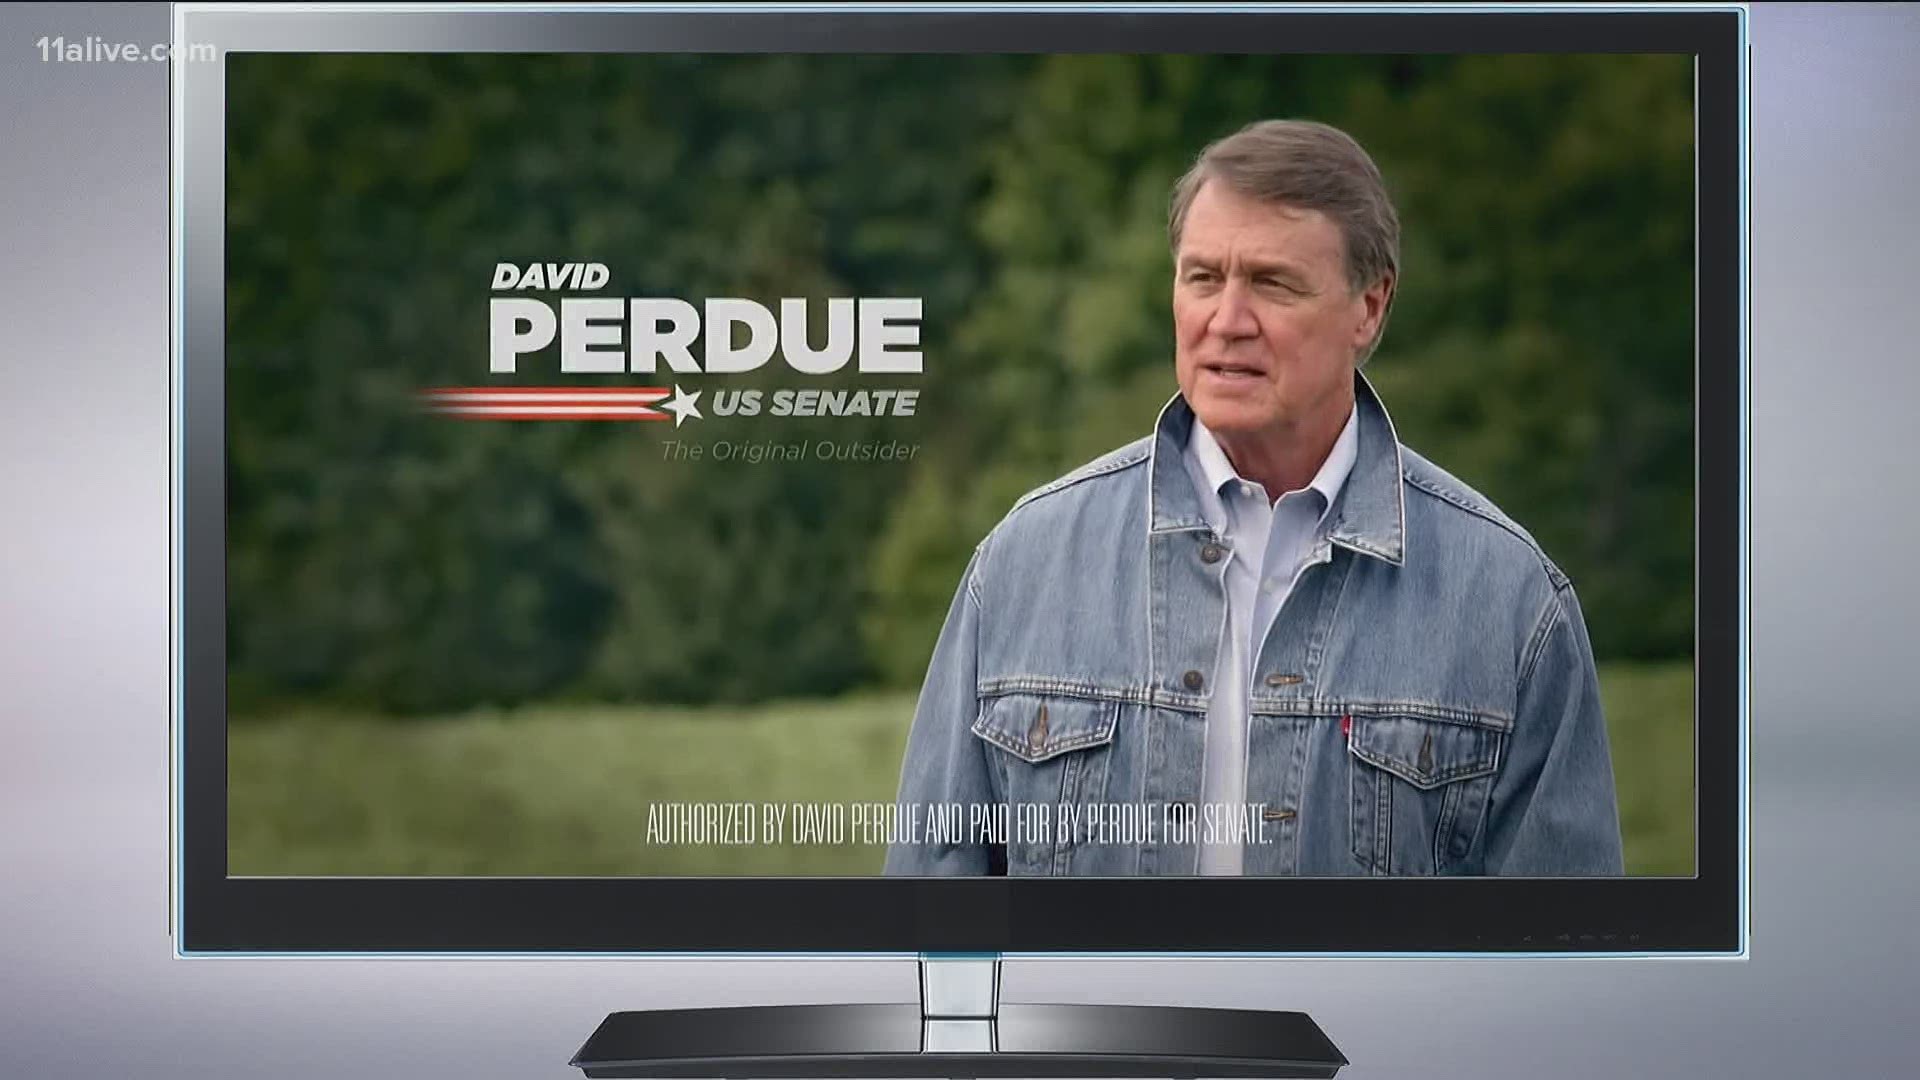 It cites a commercial that ran last month and his votes to repeal the Affordable Care Act